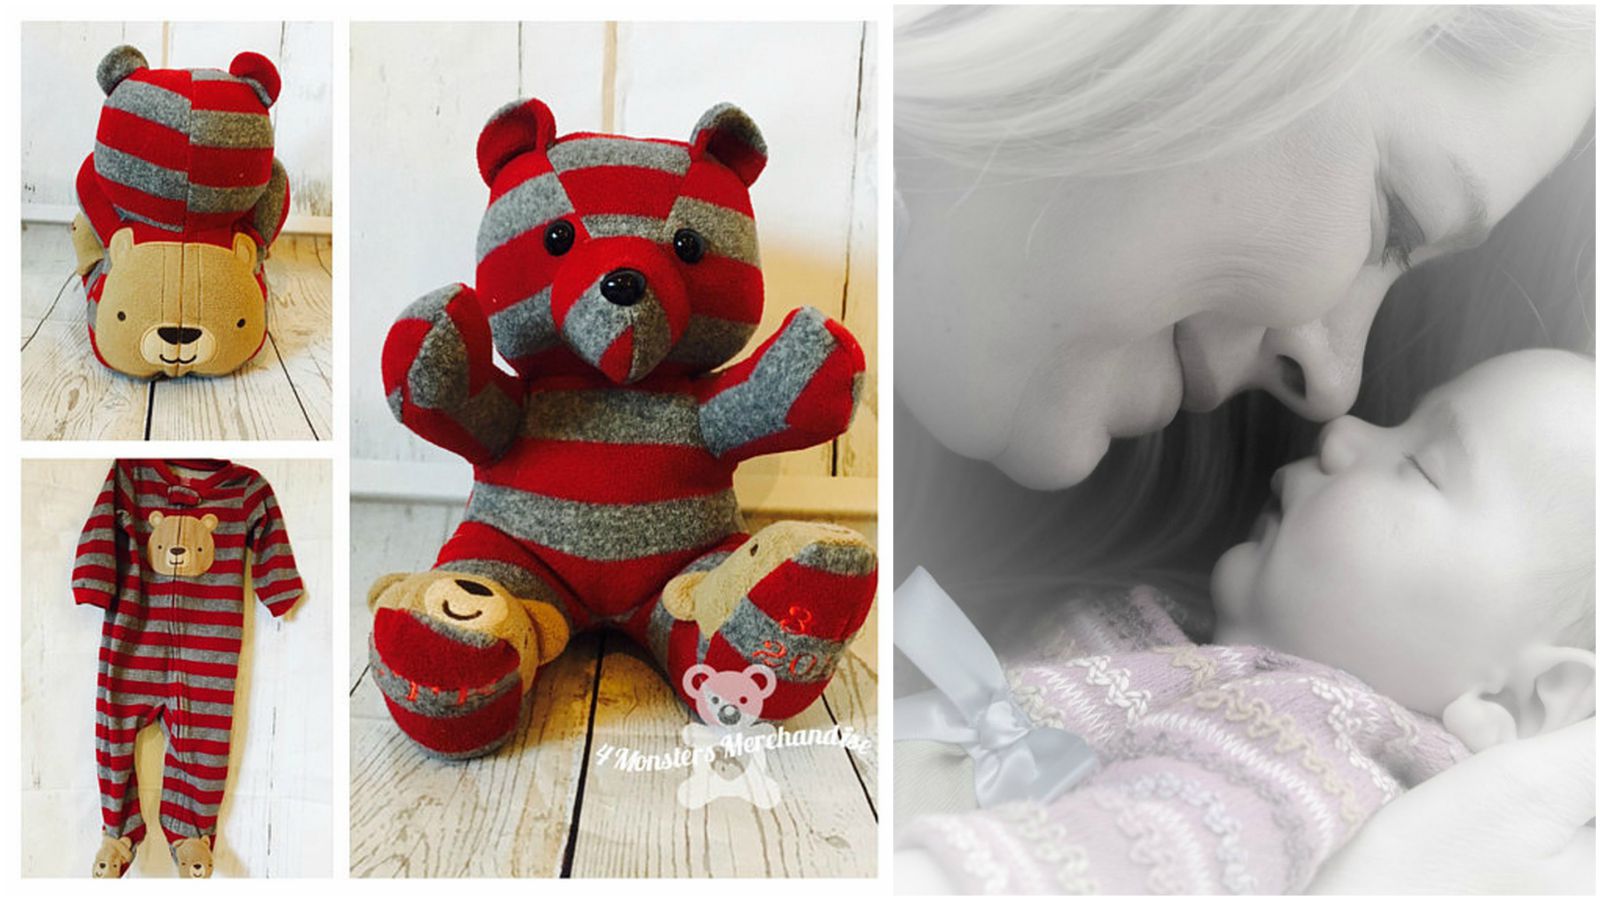 Upcycle Your Baby’s Clothes into Adorable Keepsake Memory Bears